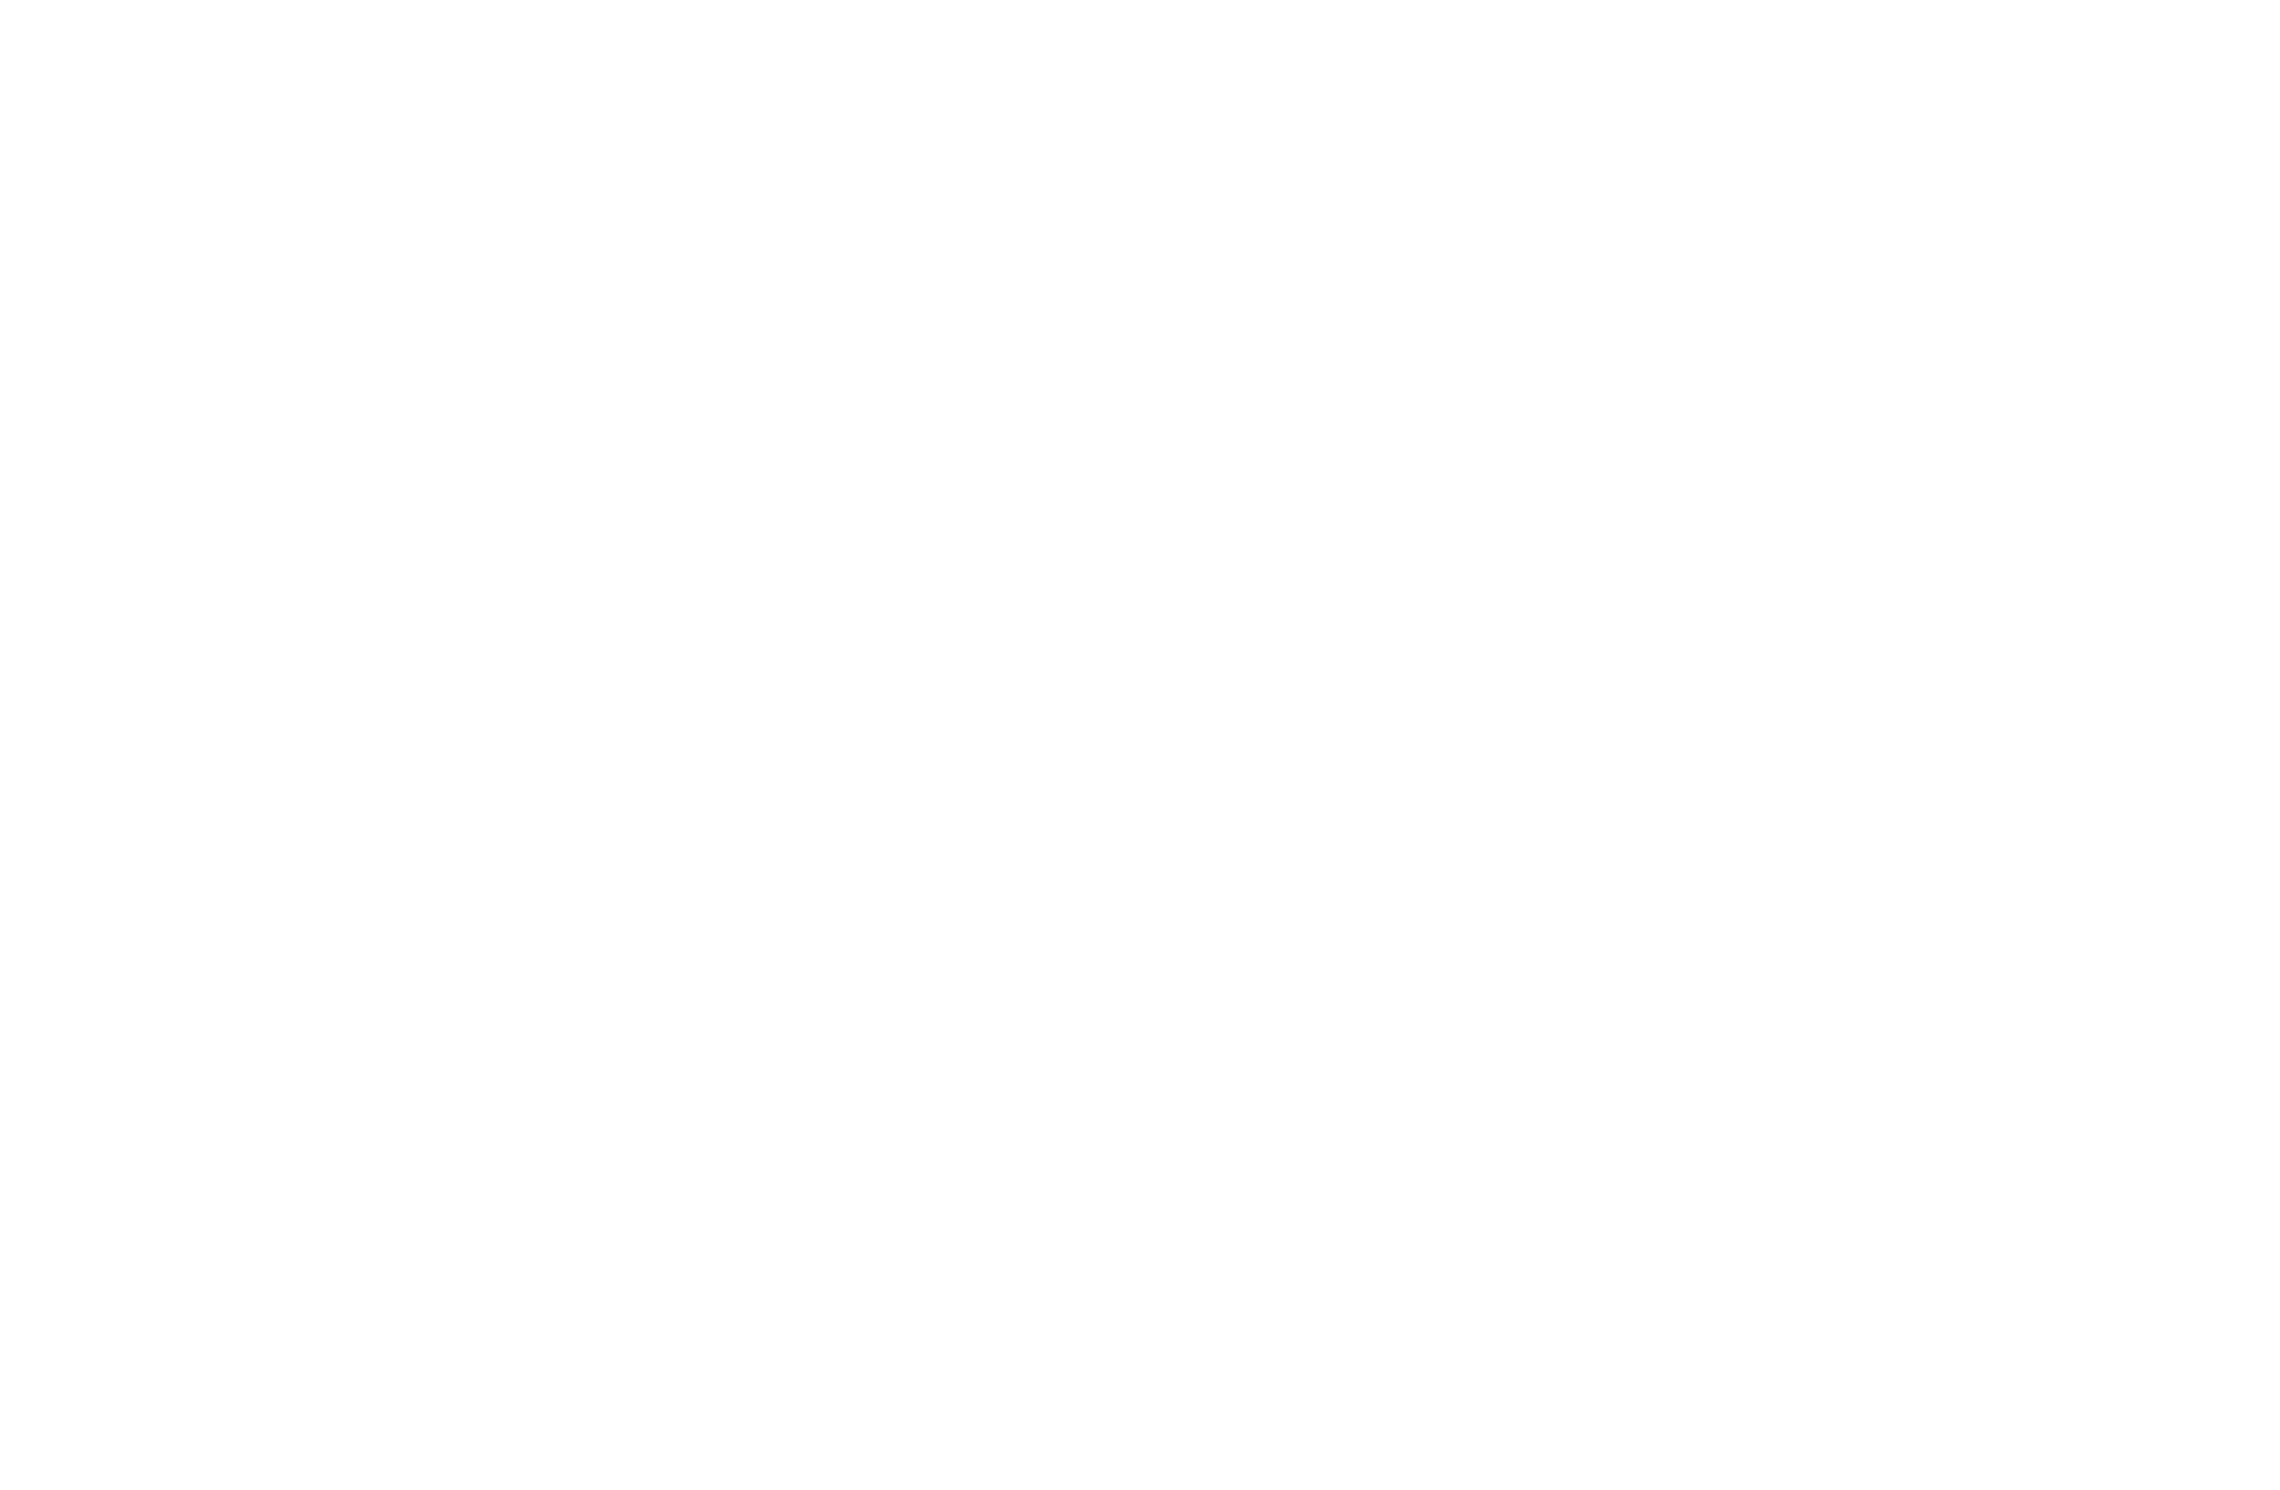 Well-Being Index